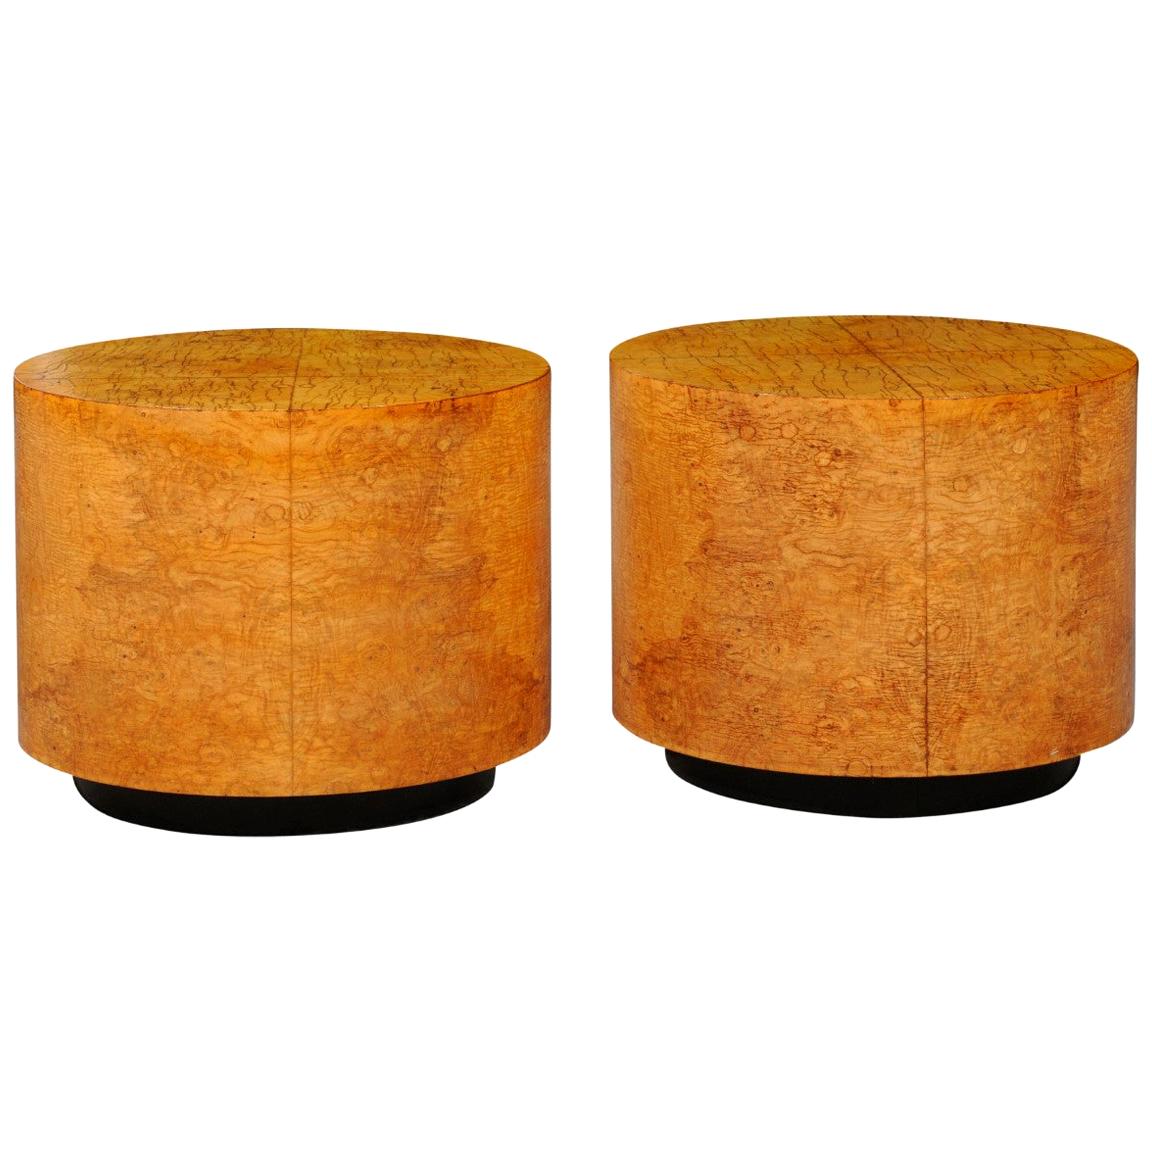 Radiant Restored Pair of Large Scale Olivewood Cylinder Tables, circa 1975